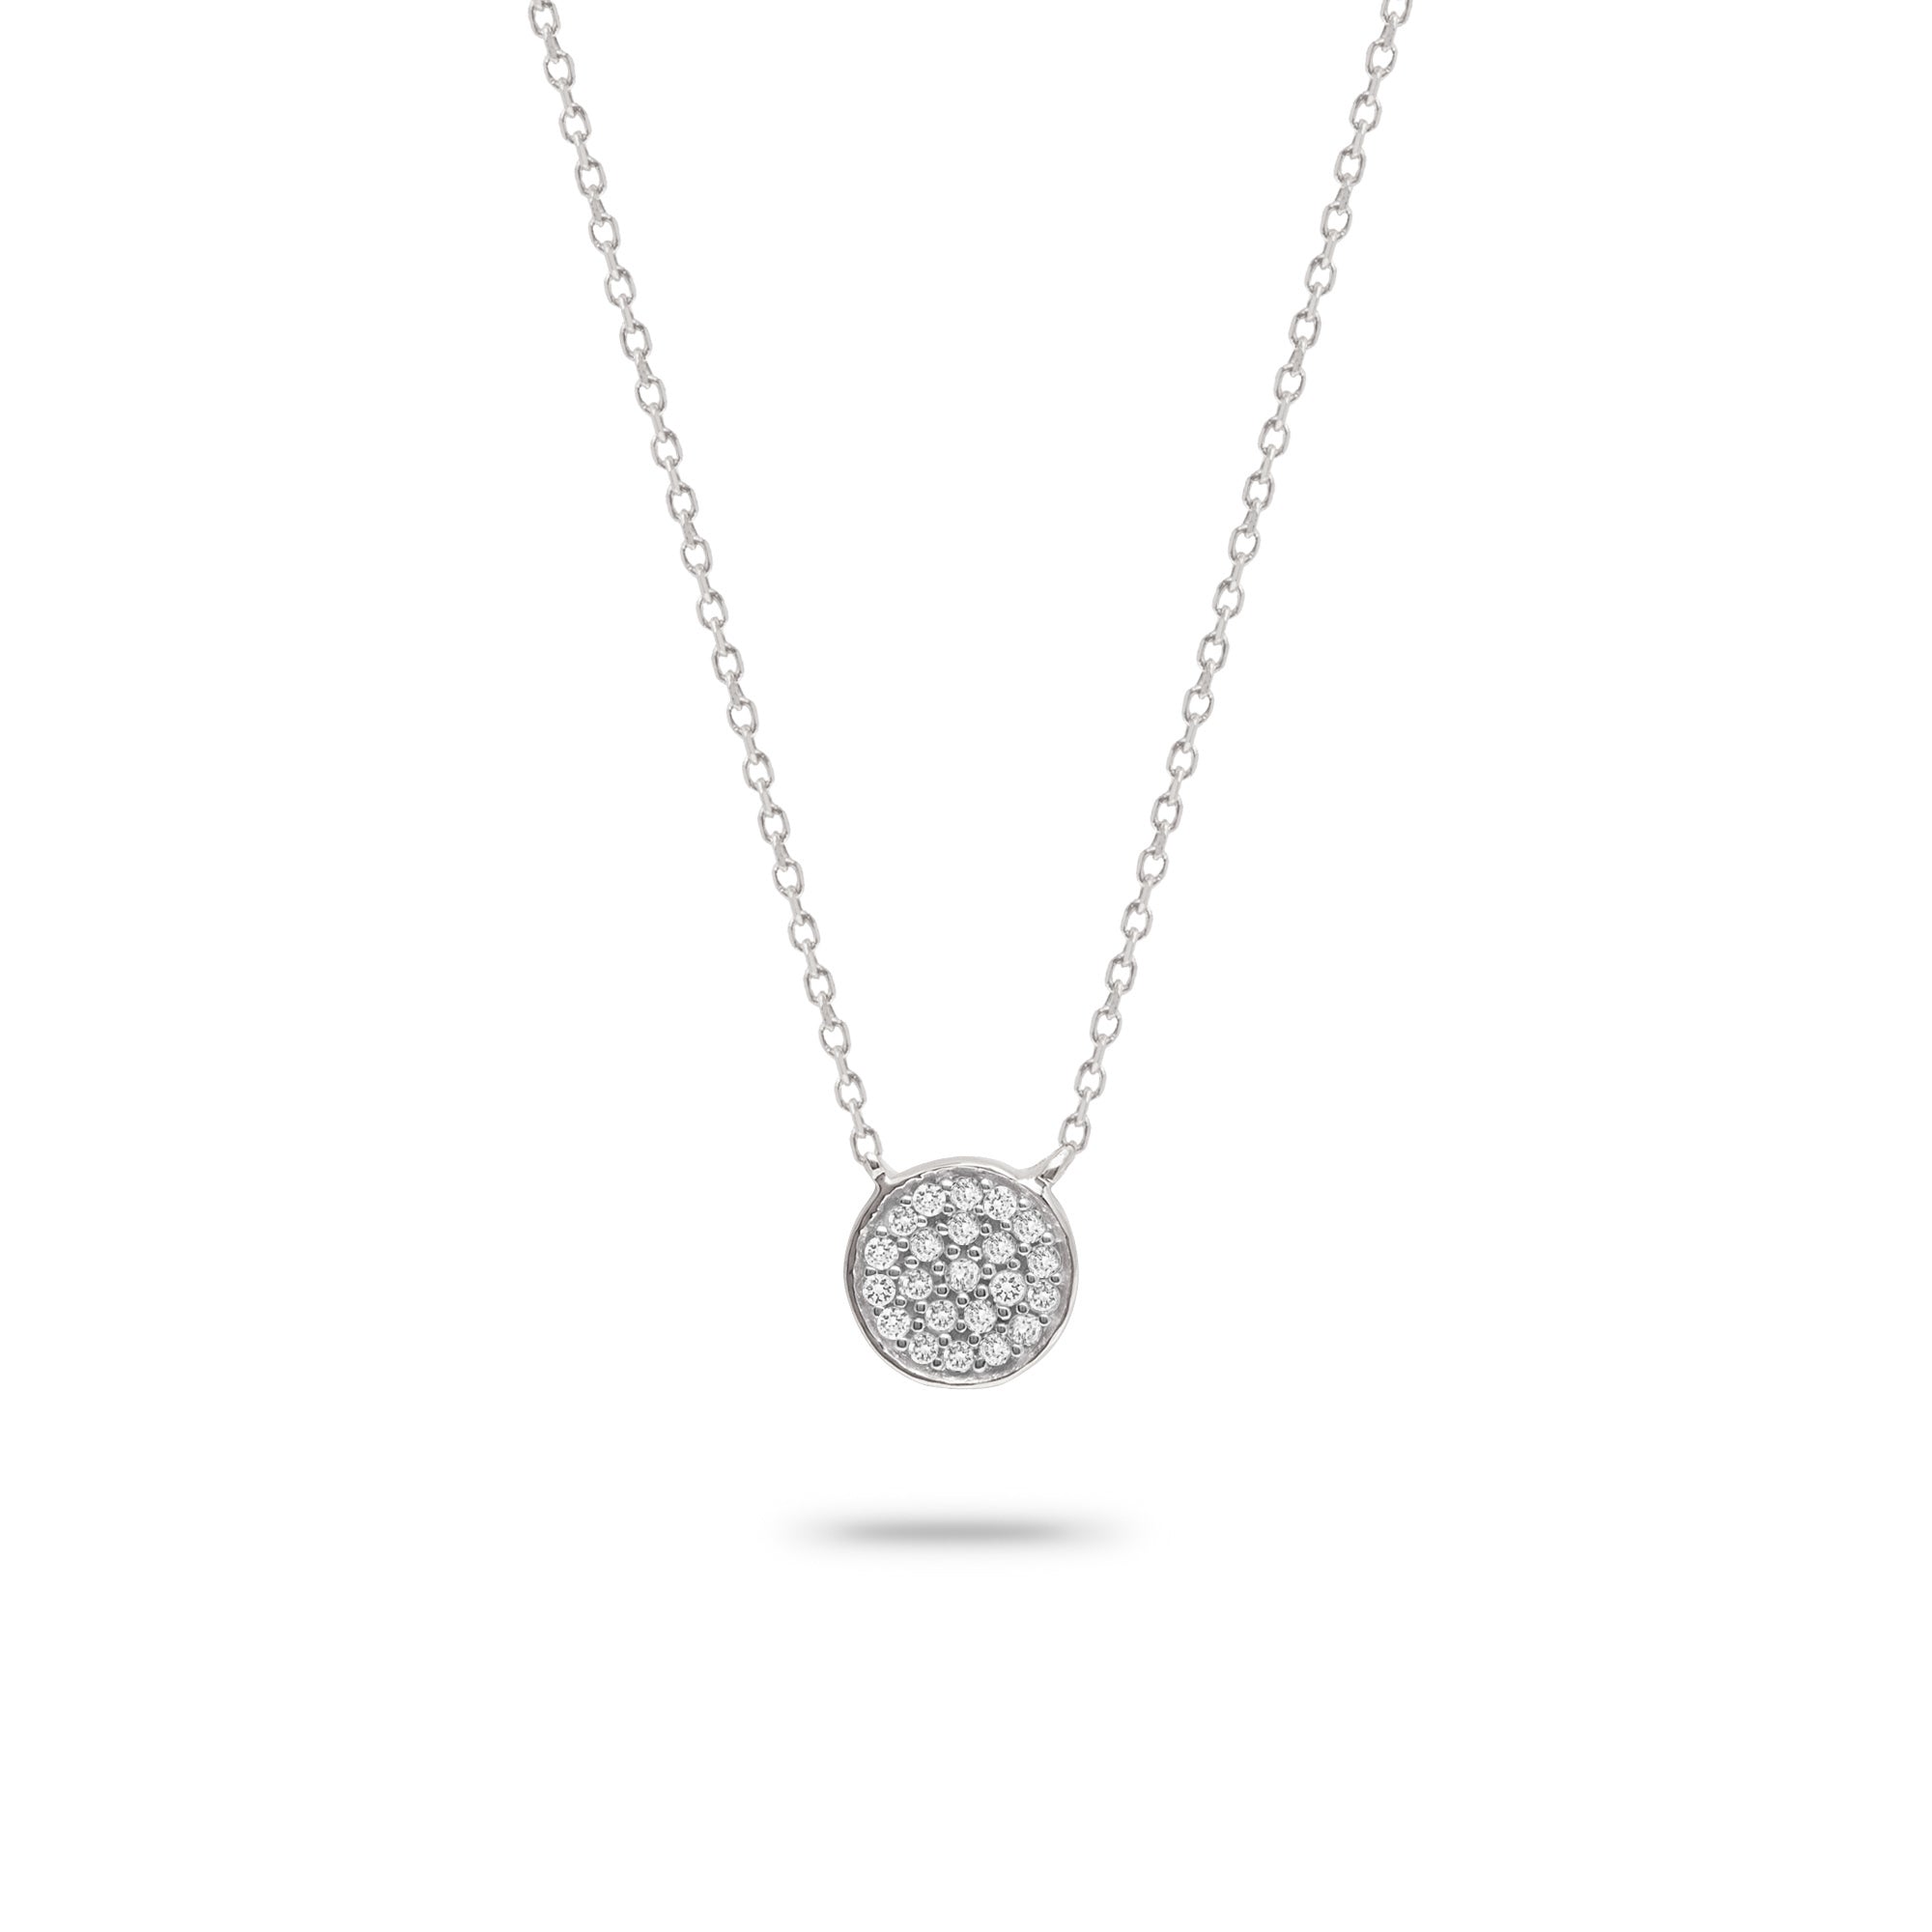 Sterling Silver Disc Necklace With Free Custom Engraving, 18 Inches |  SuperJeweler